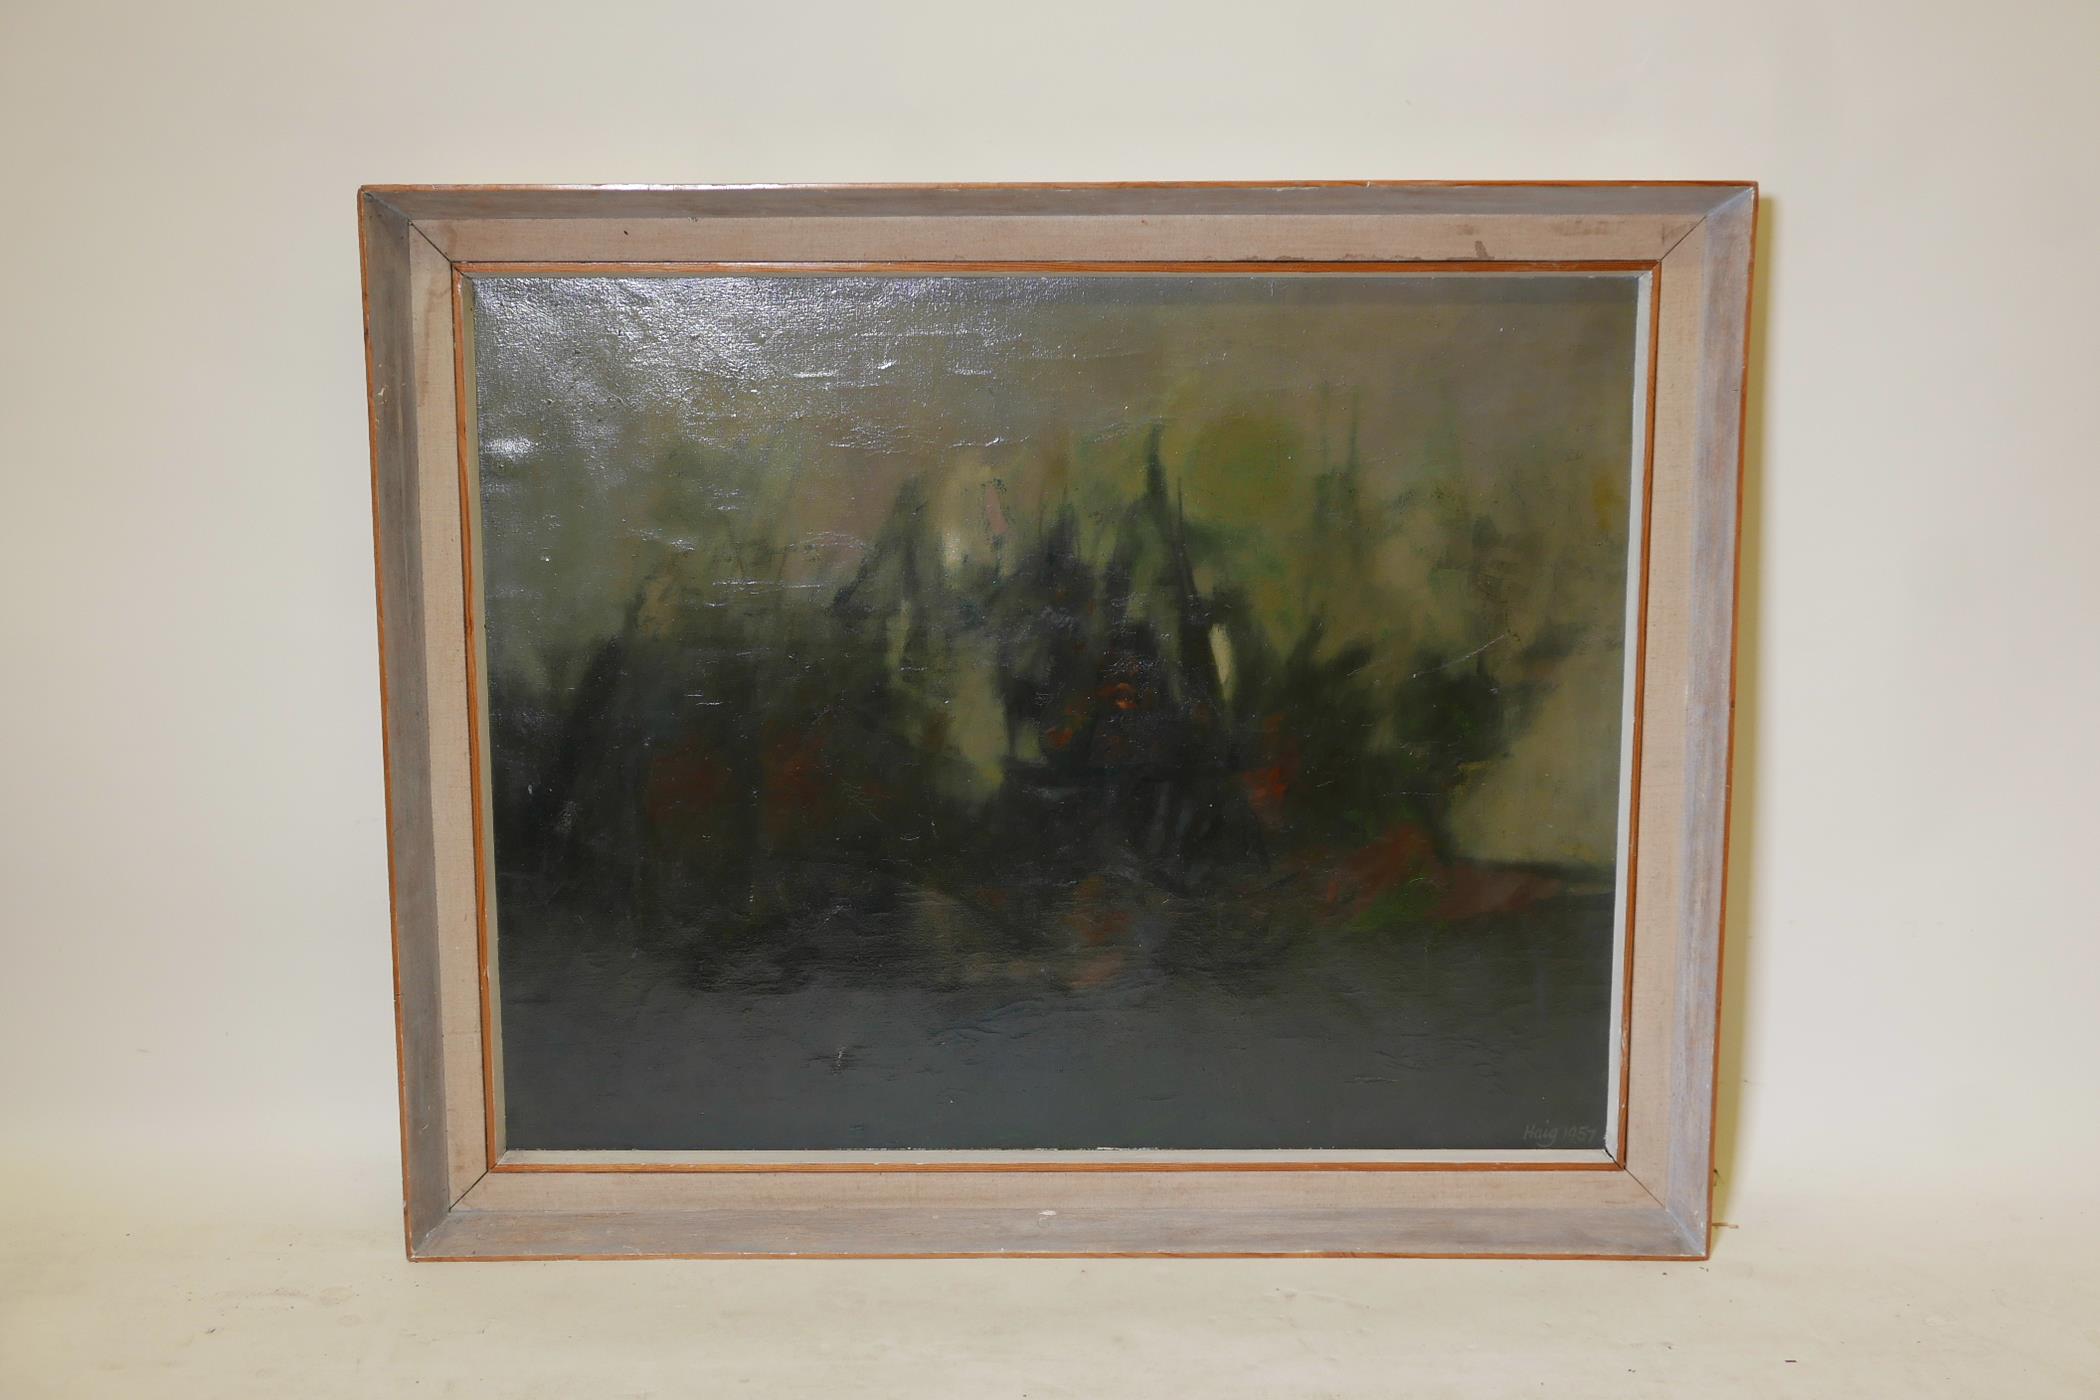 Henry Haig, Foggy Hedge, Little Bookham, abstract, 1957, oil on canvas, 38" x 30" - Image 2 of 8